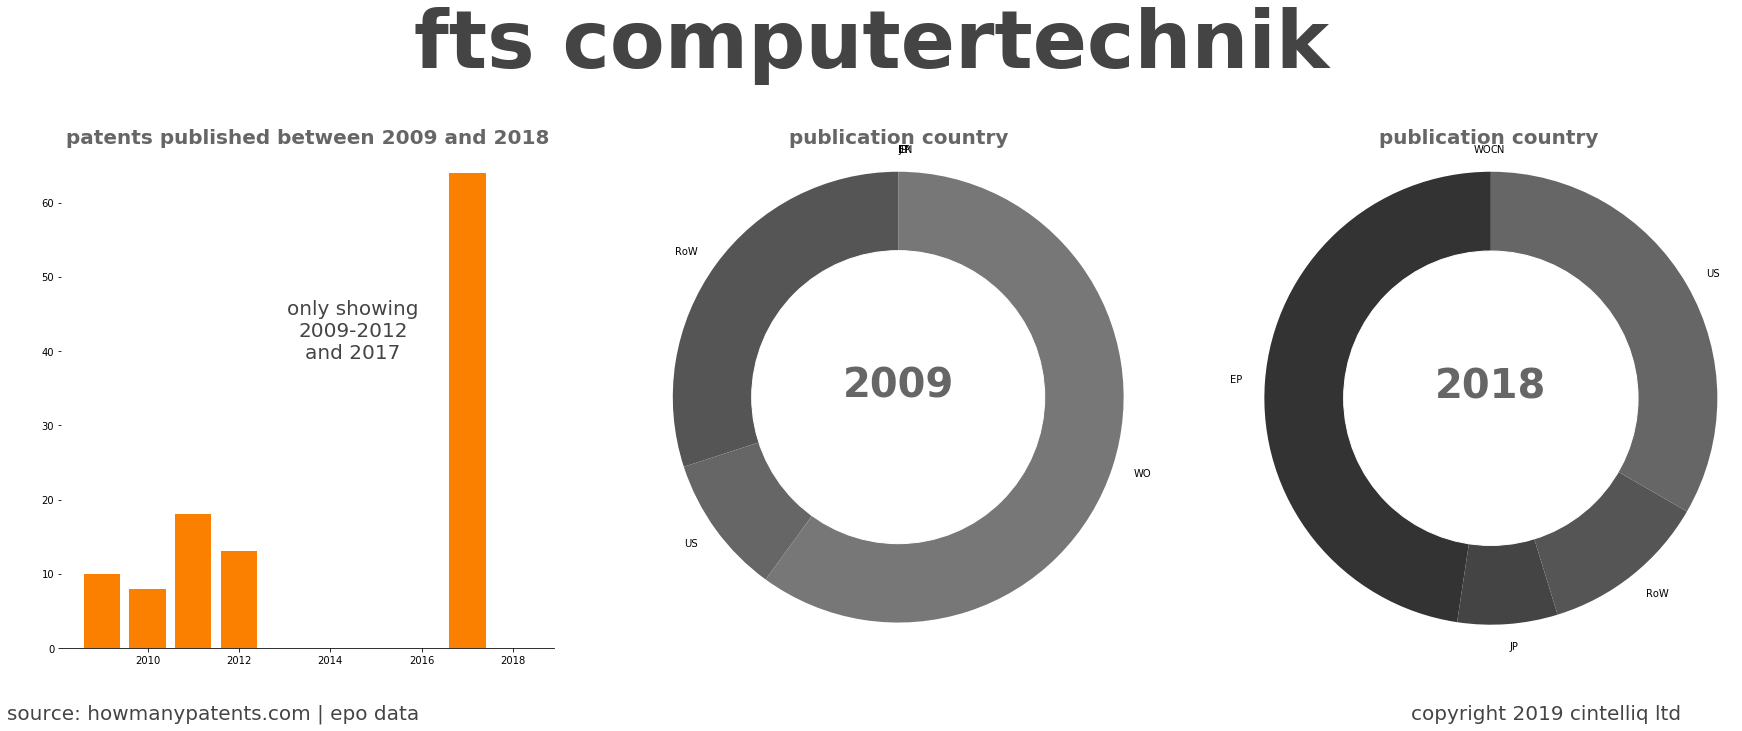 summary of patents for Fts Computertechnik